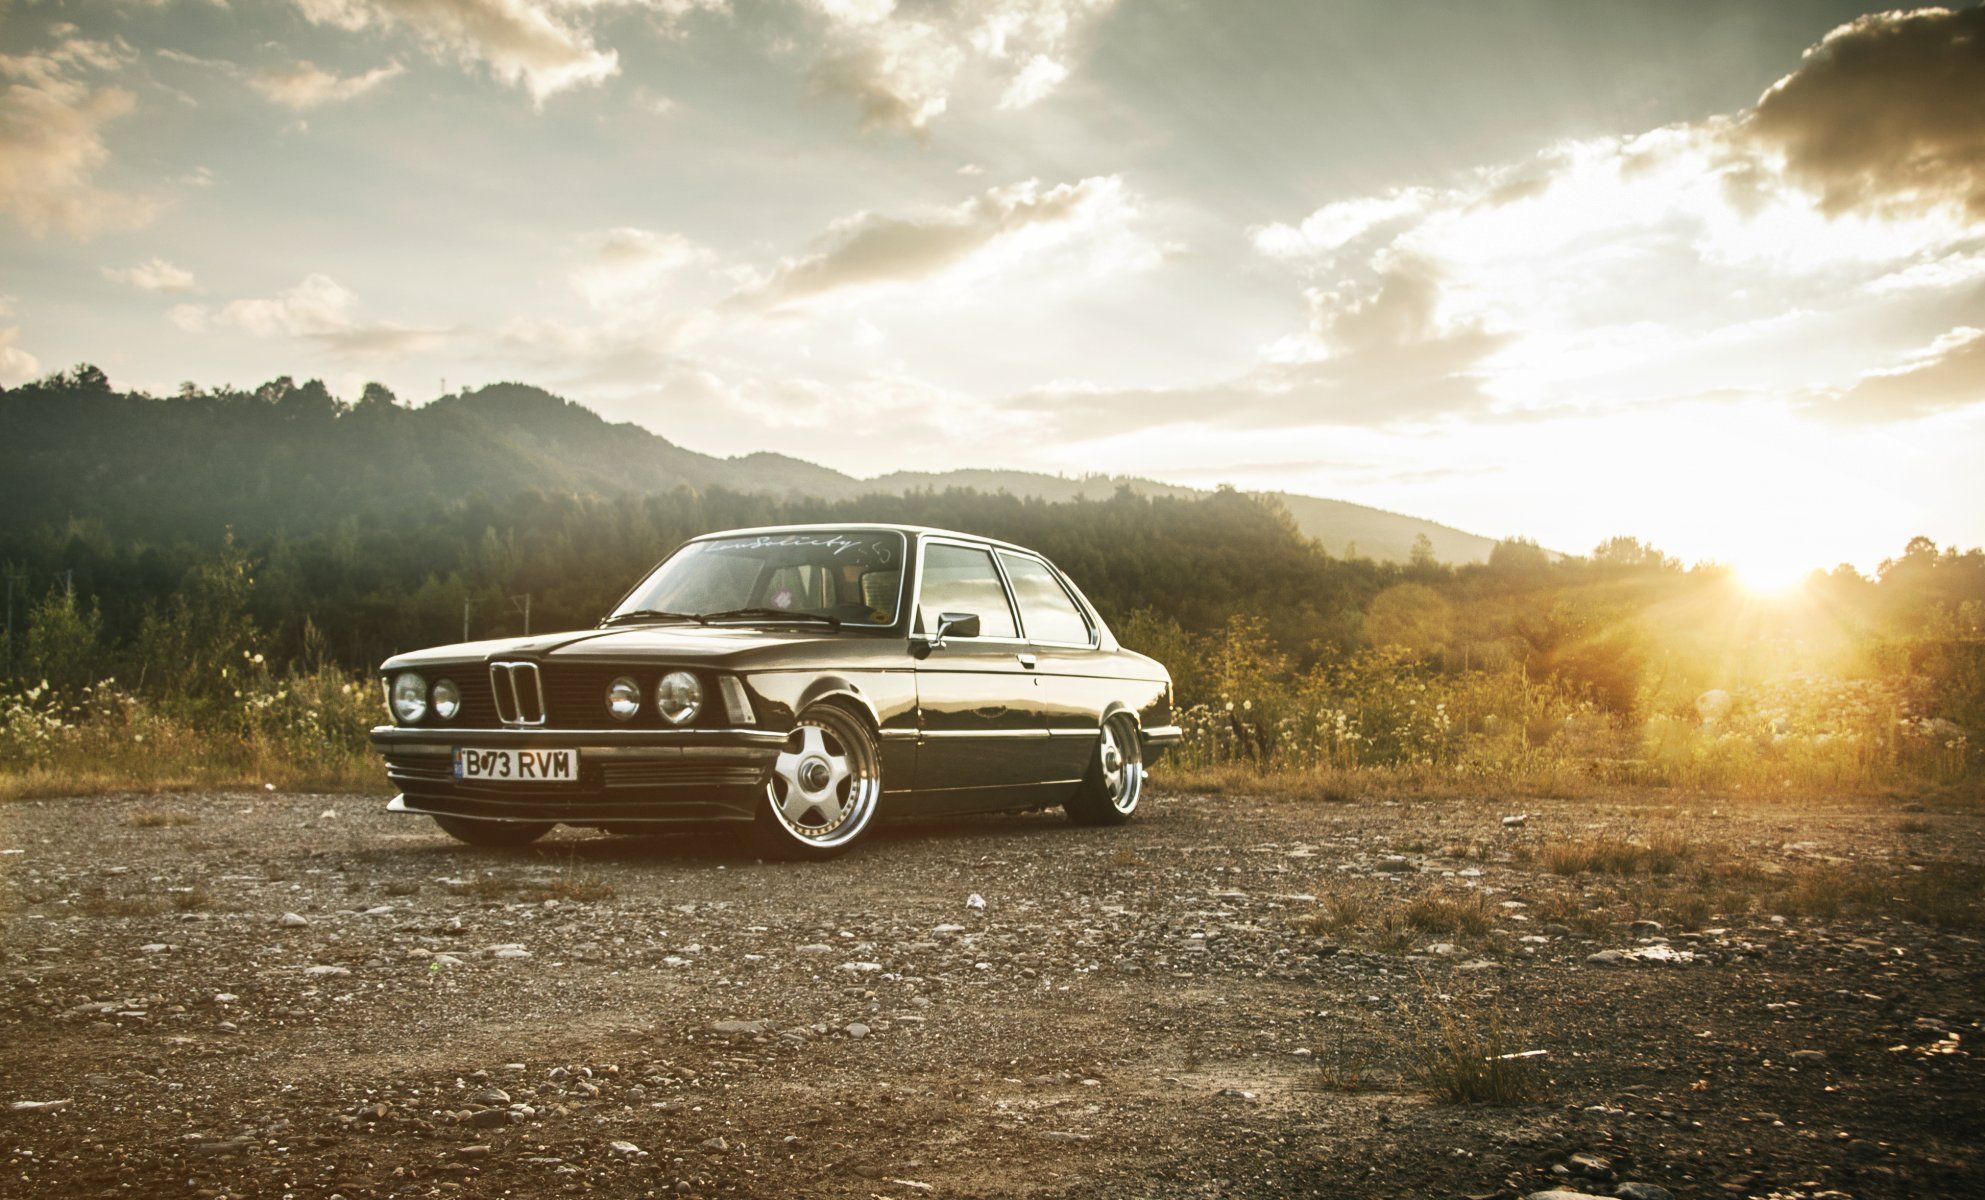 The old BMW 3 Series